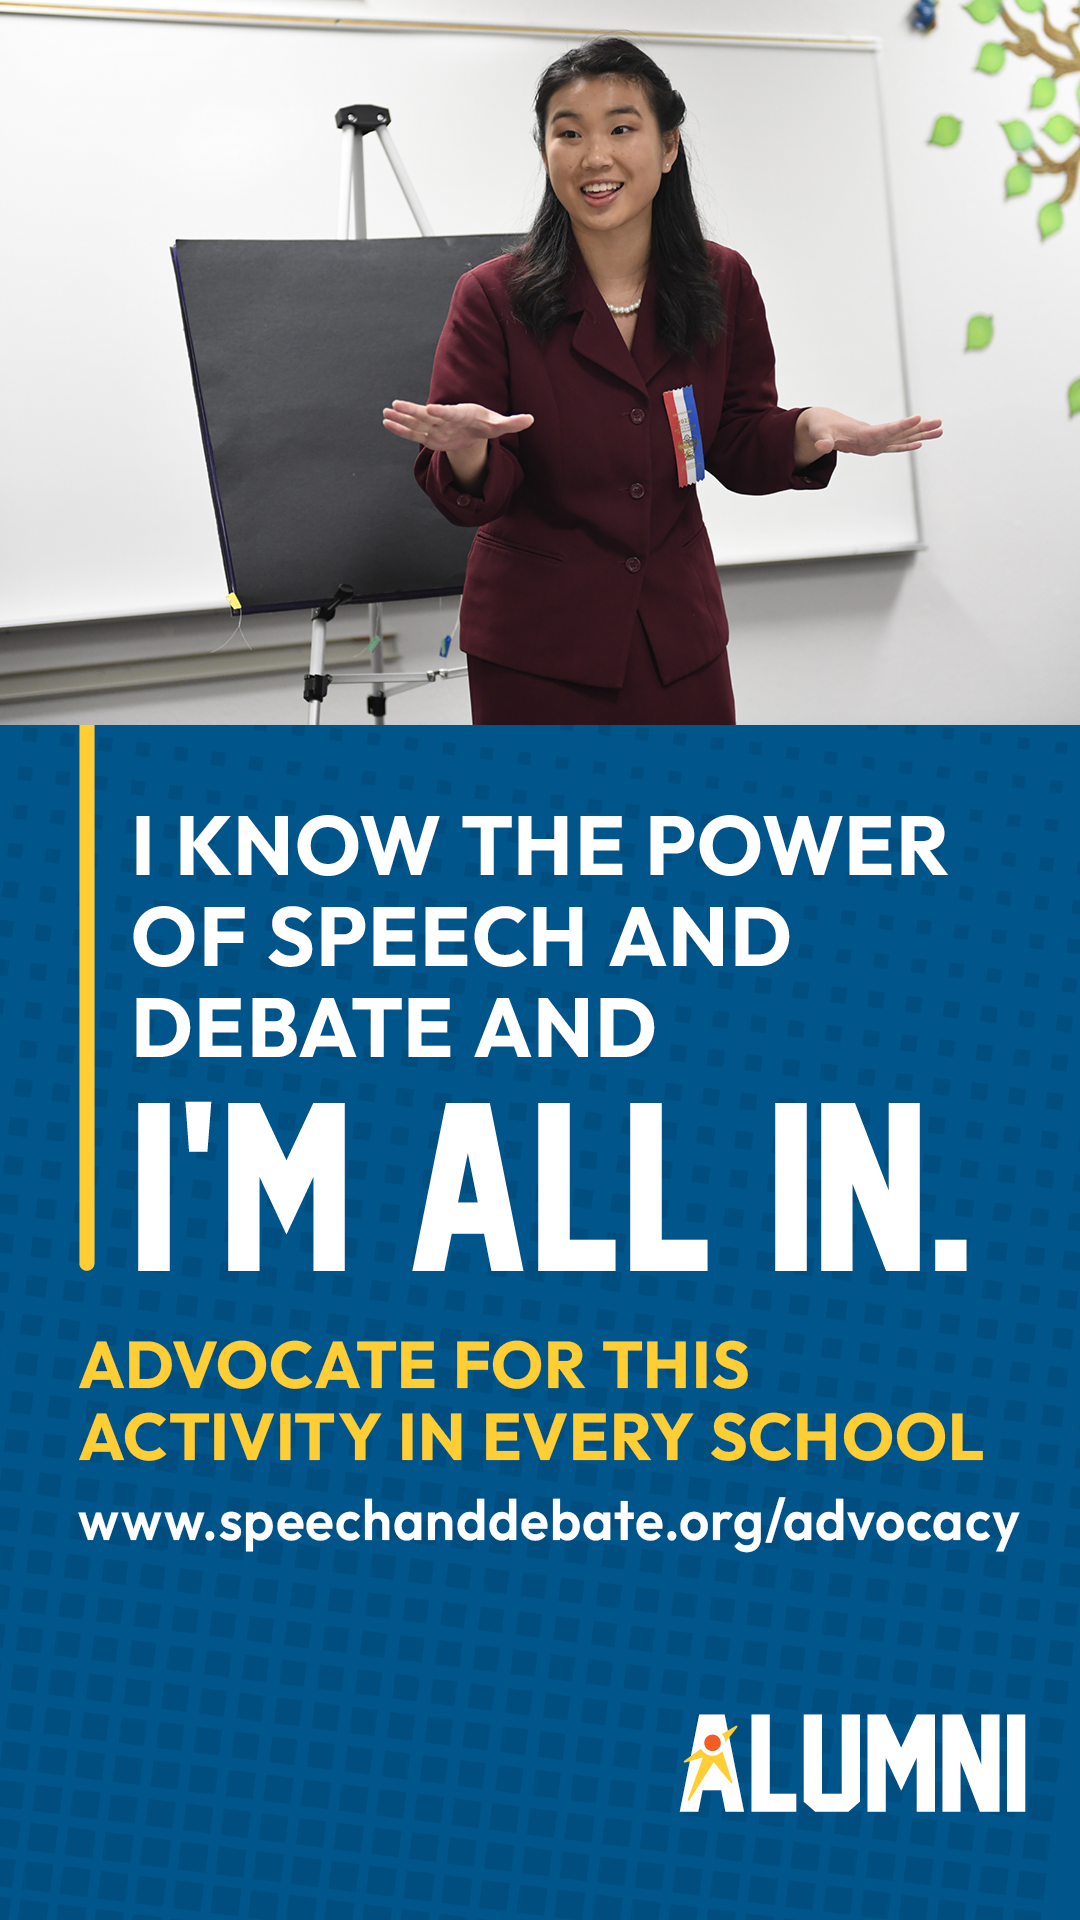 I Know The Power Of Speech And Debate And I'm All In. - Advocate For This Activity In Every School